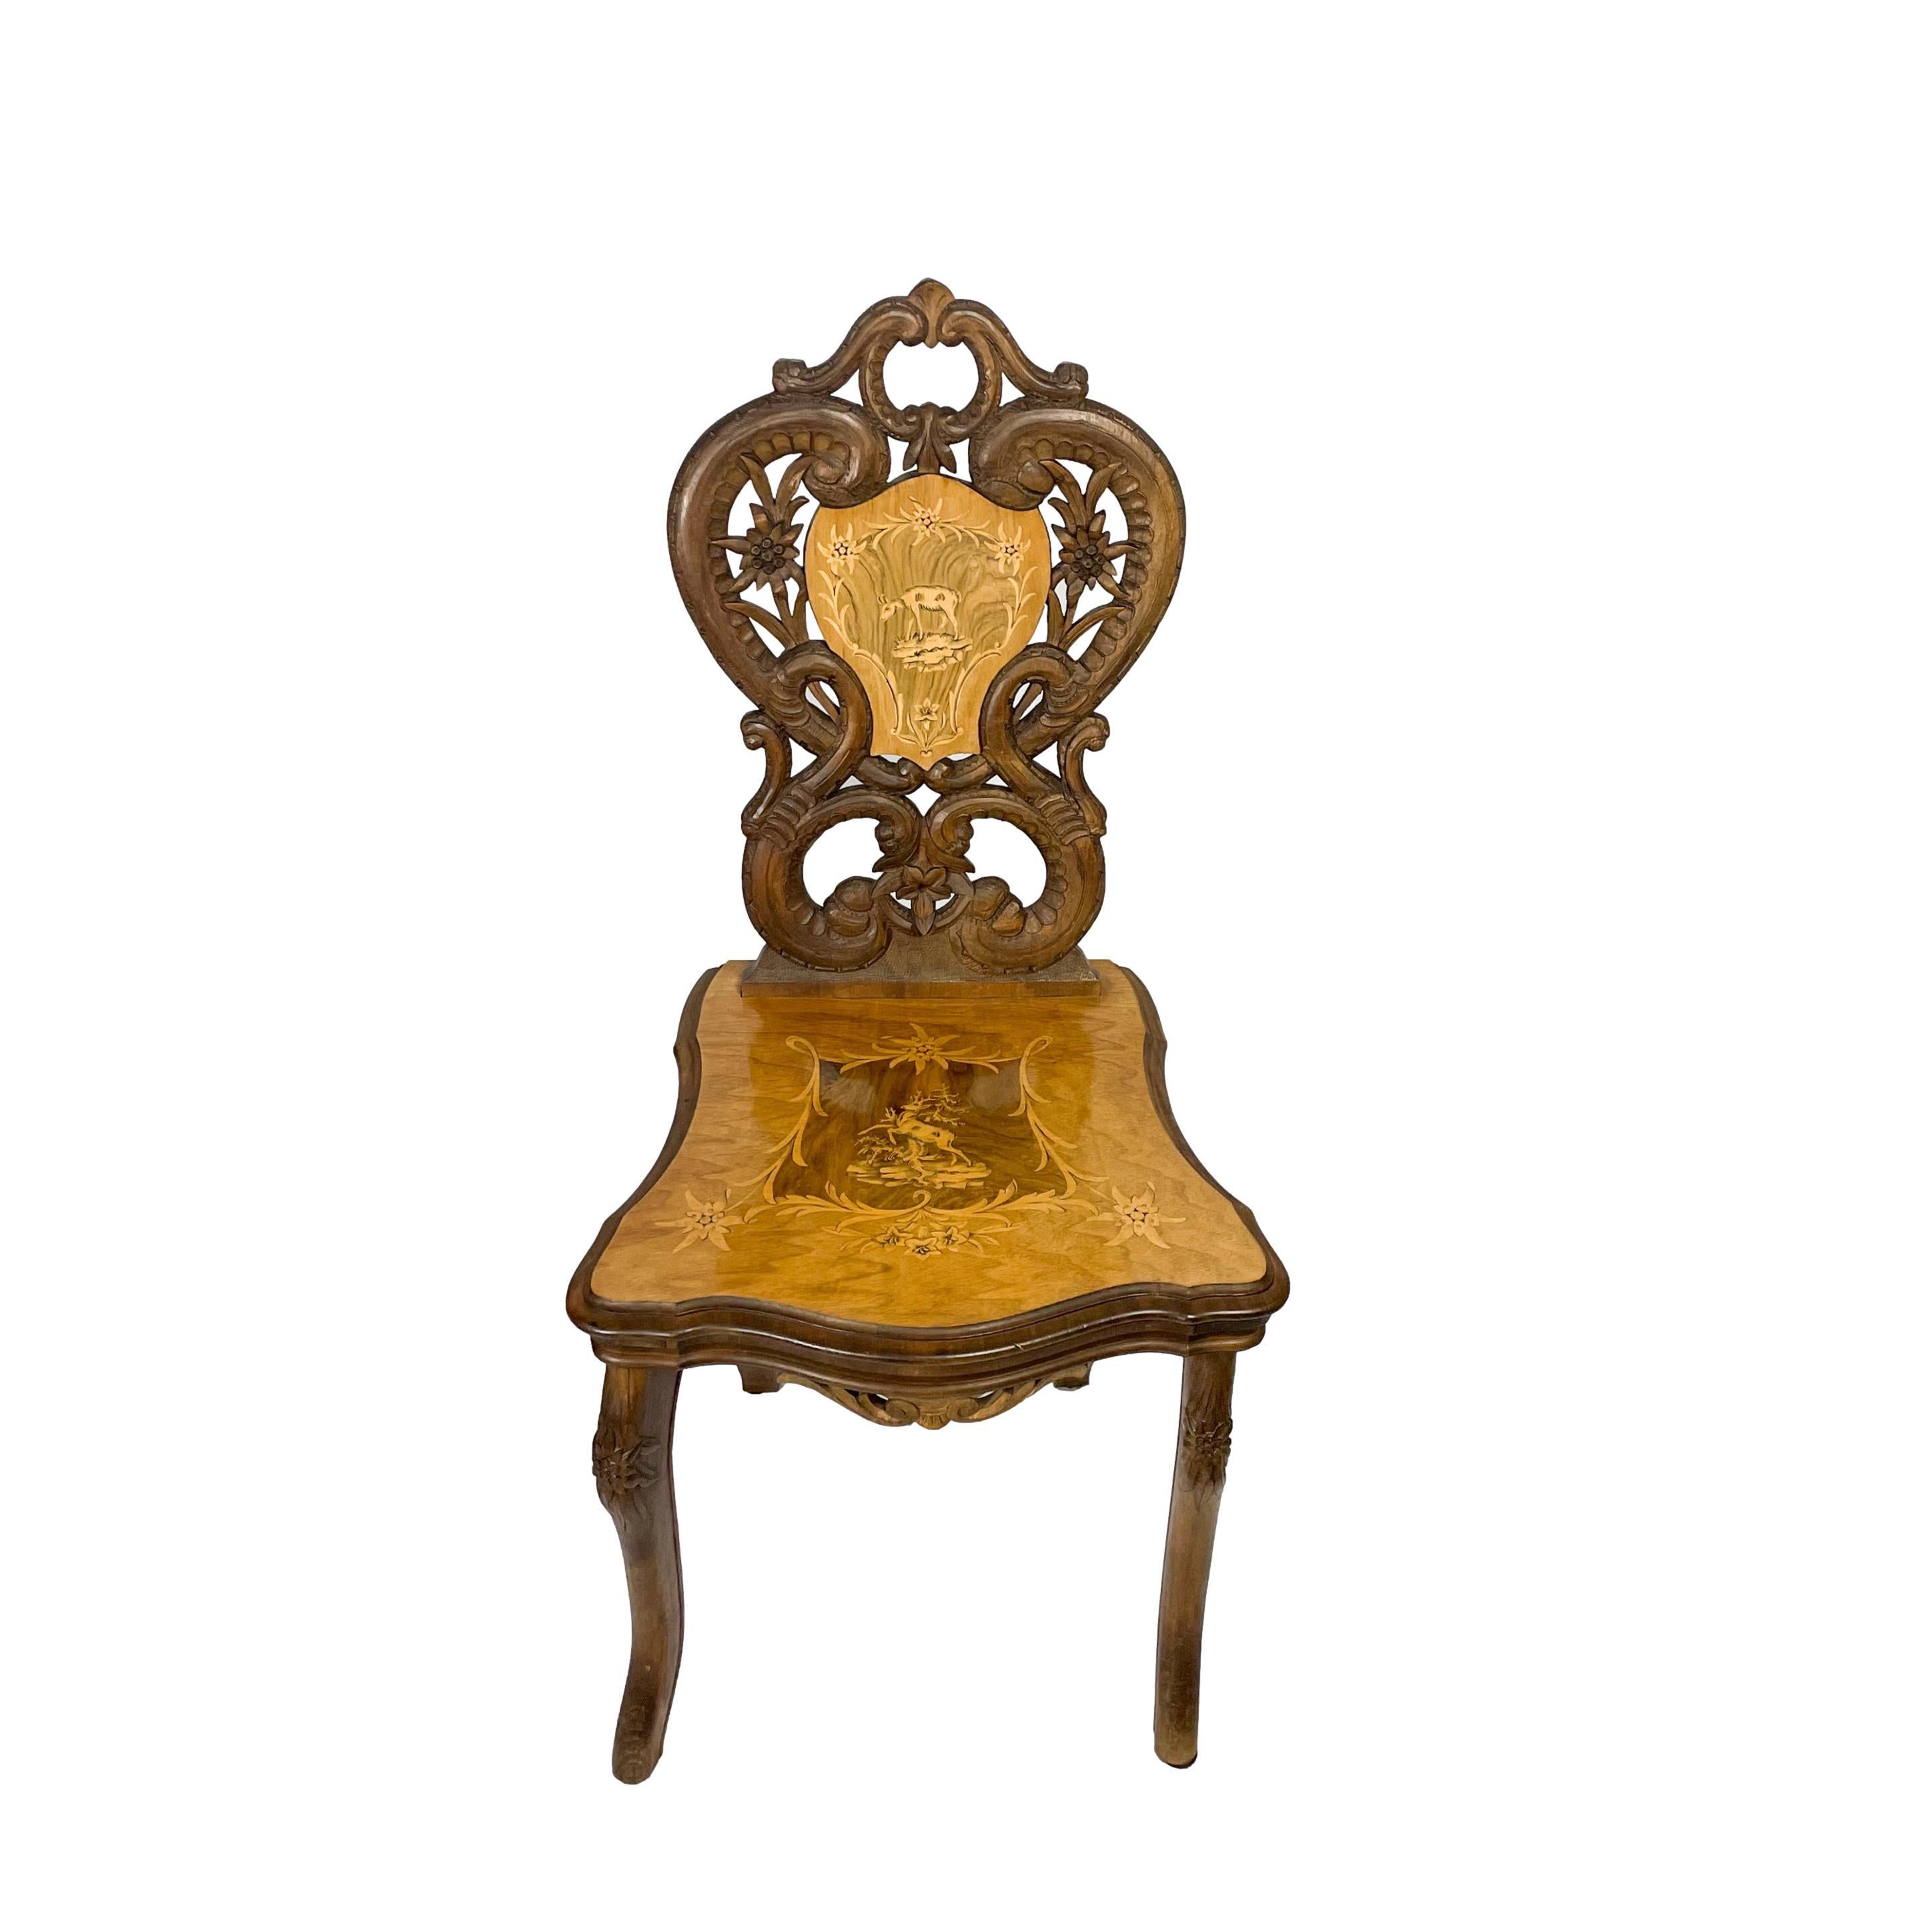 A Black Forest Carved Walnut Chair, the seat and seatback with intricately inlaid cartouches each depicting an alpine chamois, with carved edelweiss and leaves, with the working music box mechanism under the seat, Brienz, Switzerland, ca. 1900. 
